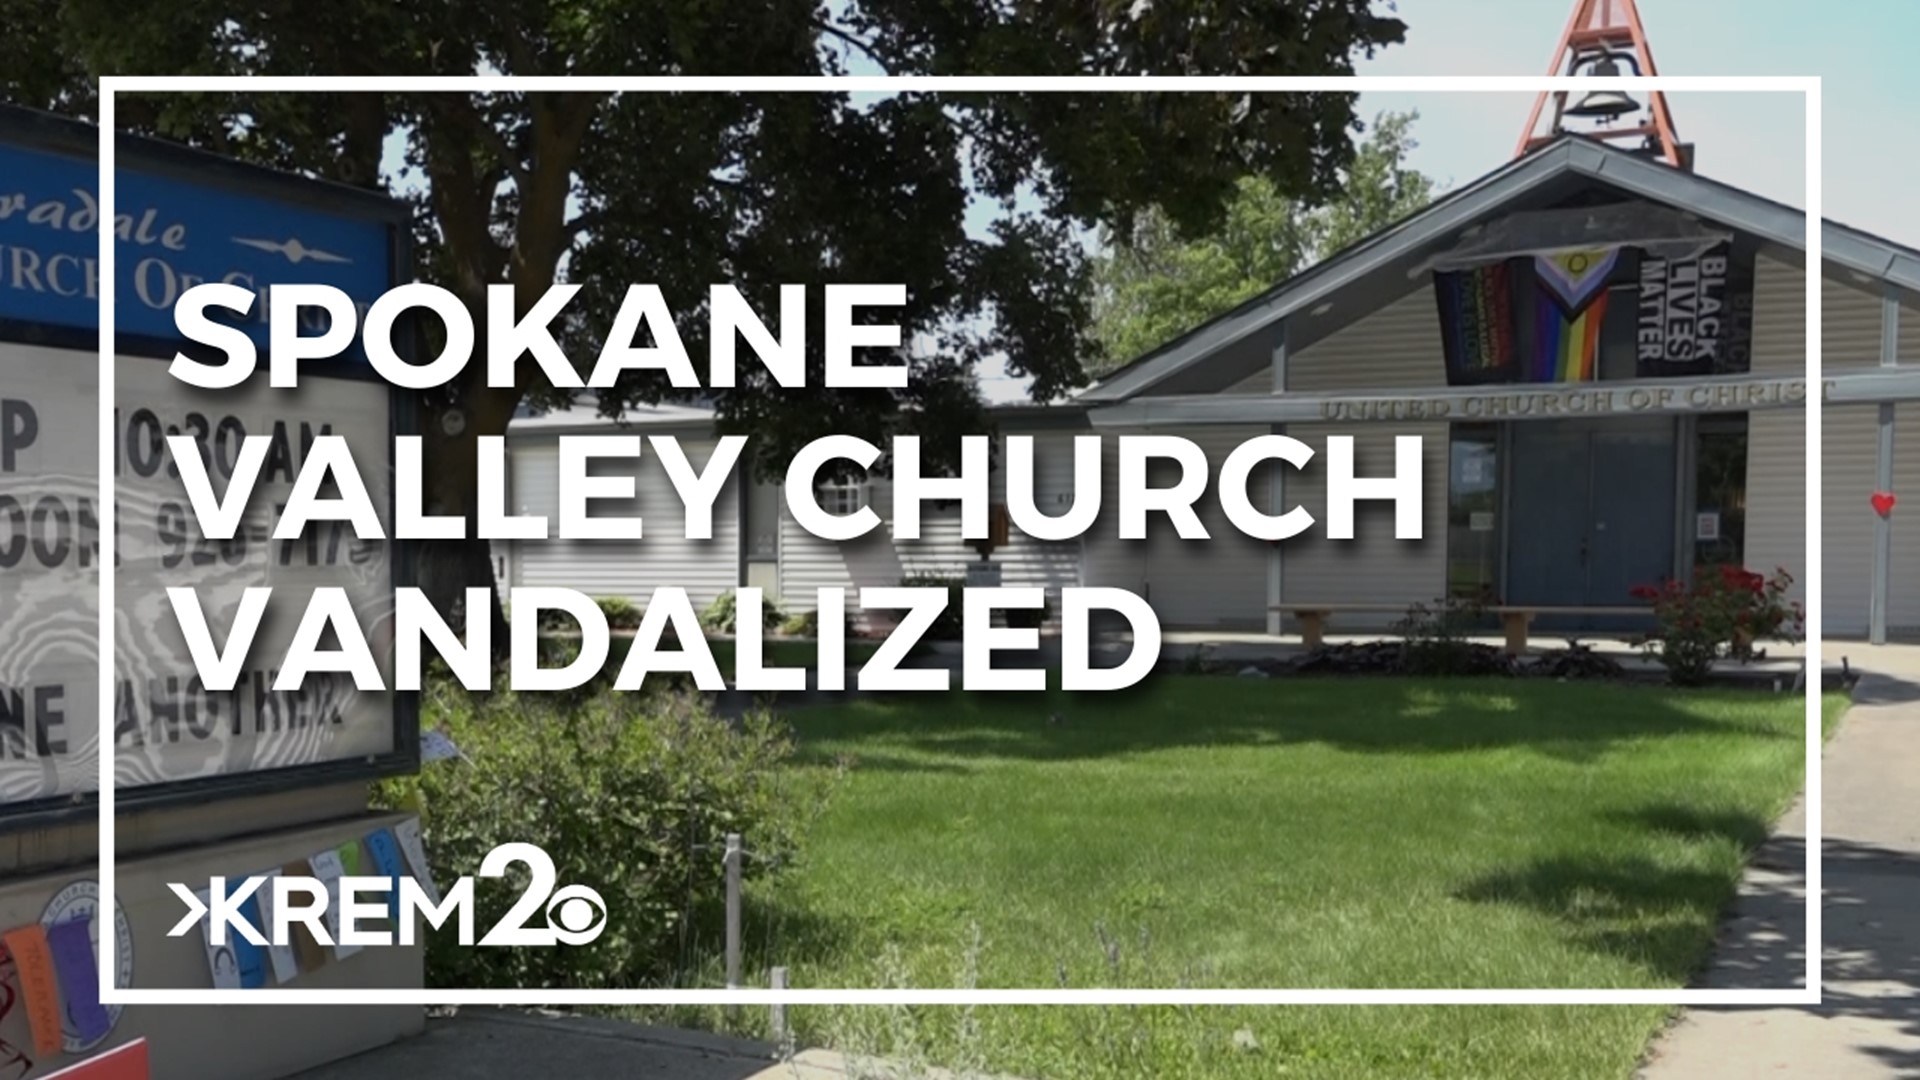 Veradale United Church of Christ was allegedly the target of recent vandalism and burglary. Pastor Gen Heywood said she wanted to respond with a powerful message.